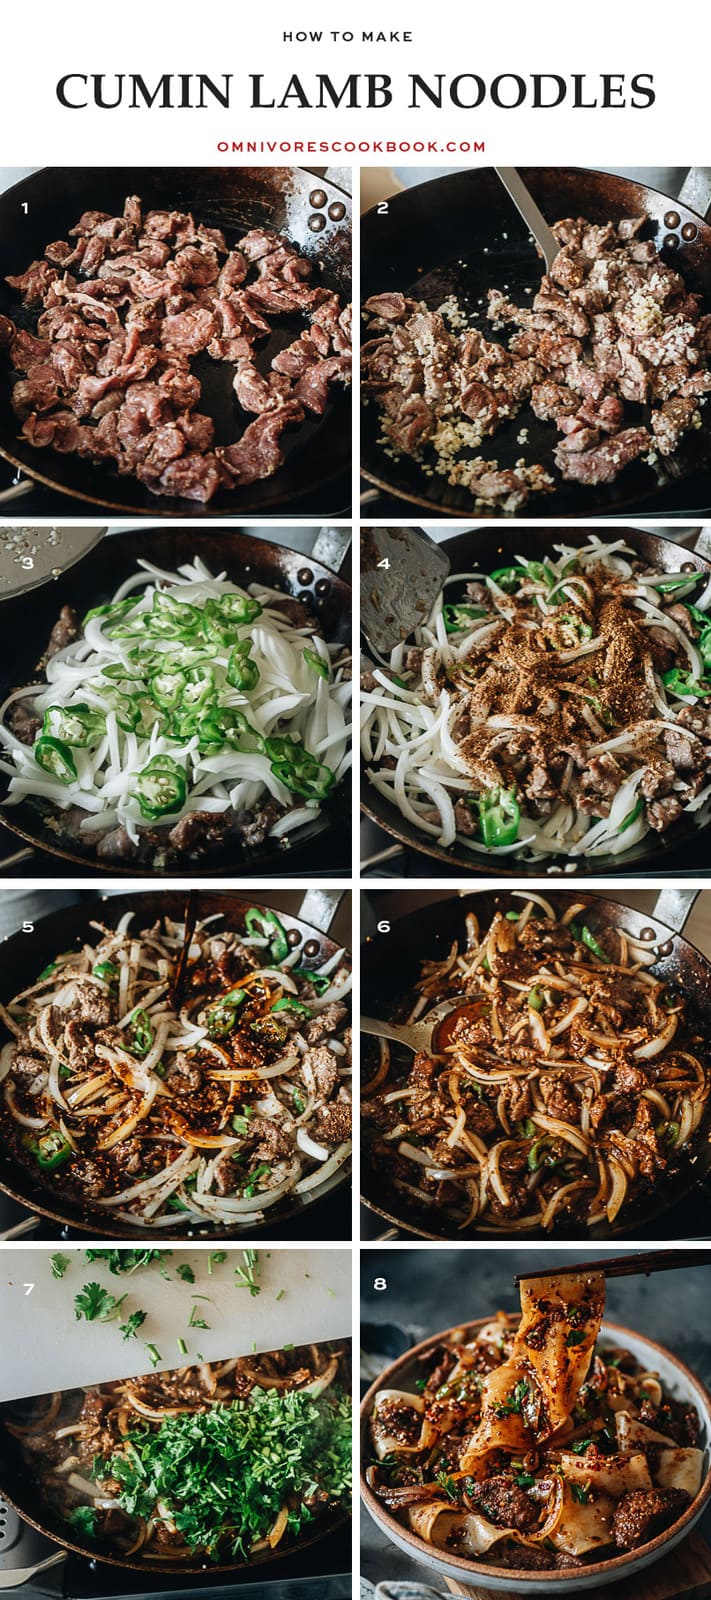 How to cook cumin lamb noodles step-by-step